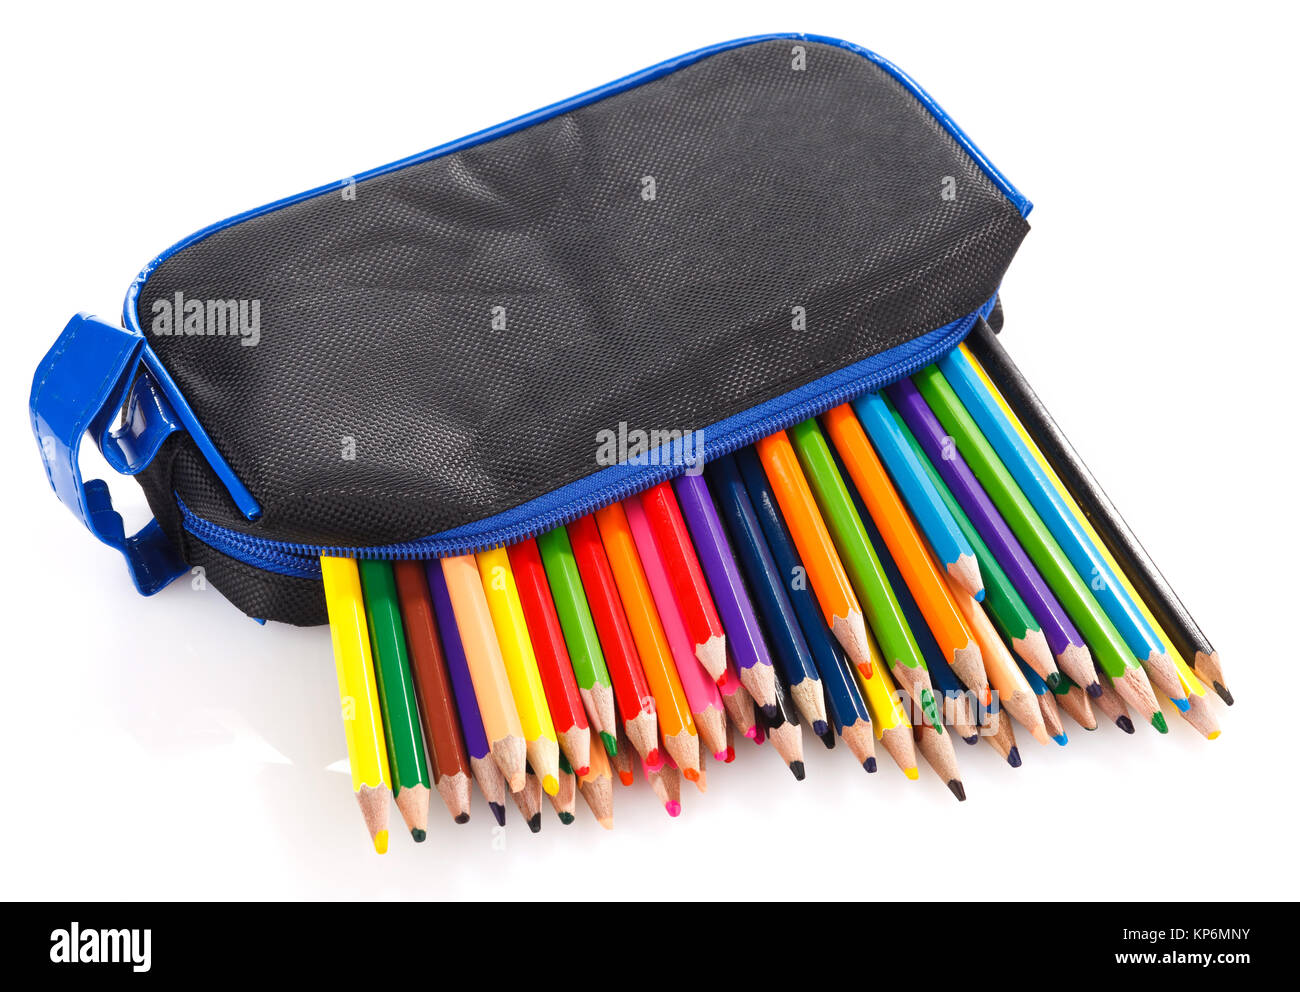 Red pencil case and pencils isolated on white background Stock Photo - Alamy